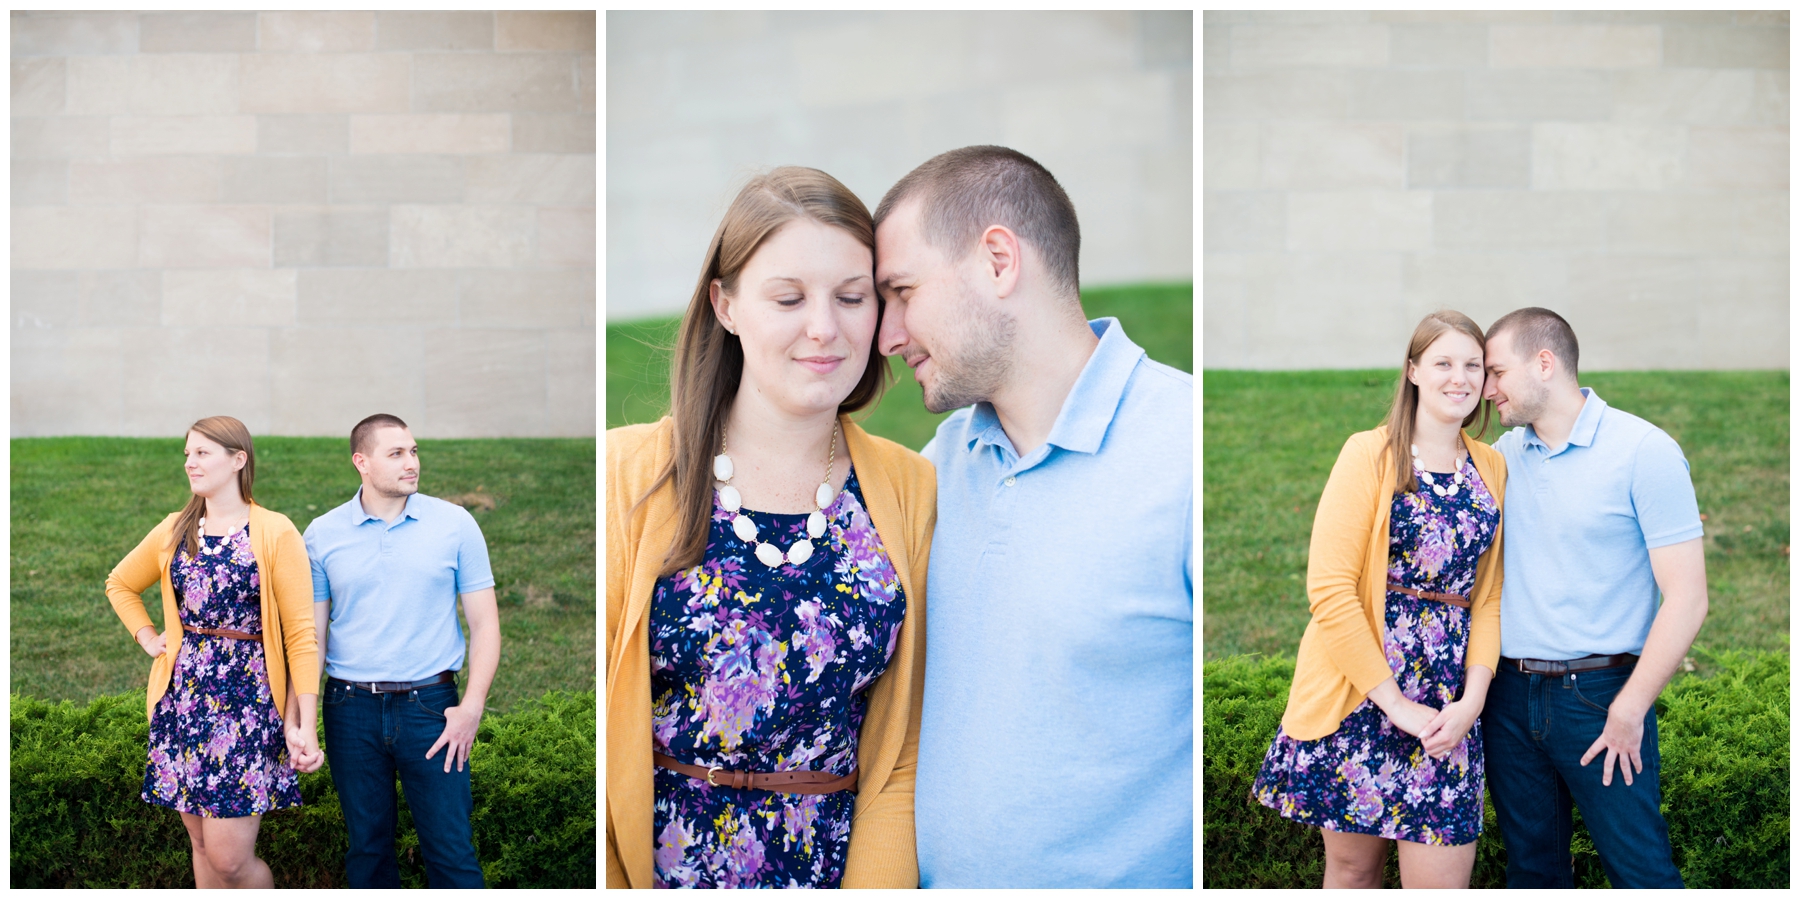 Engagement pictures downtown Kansas City at Liberty Memorial with floral dress and mustard yellow cardigan, fountains and tiled walls with city scape by photographer Lacey Rene Studios